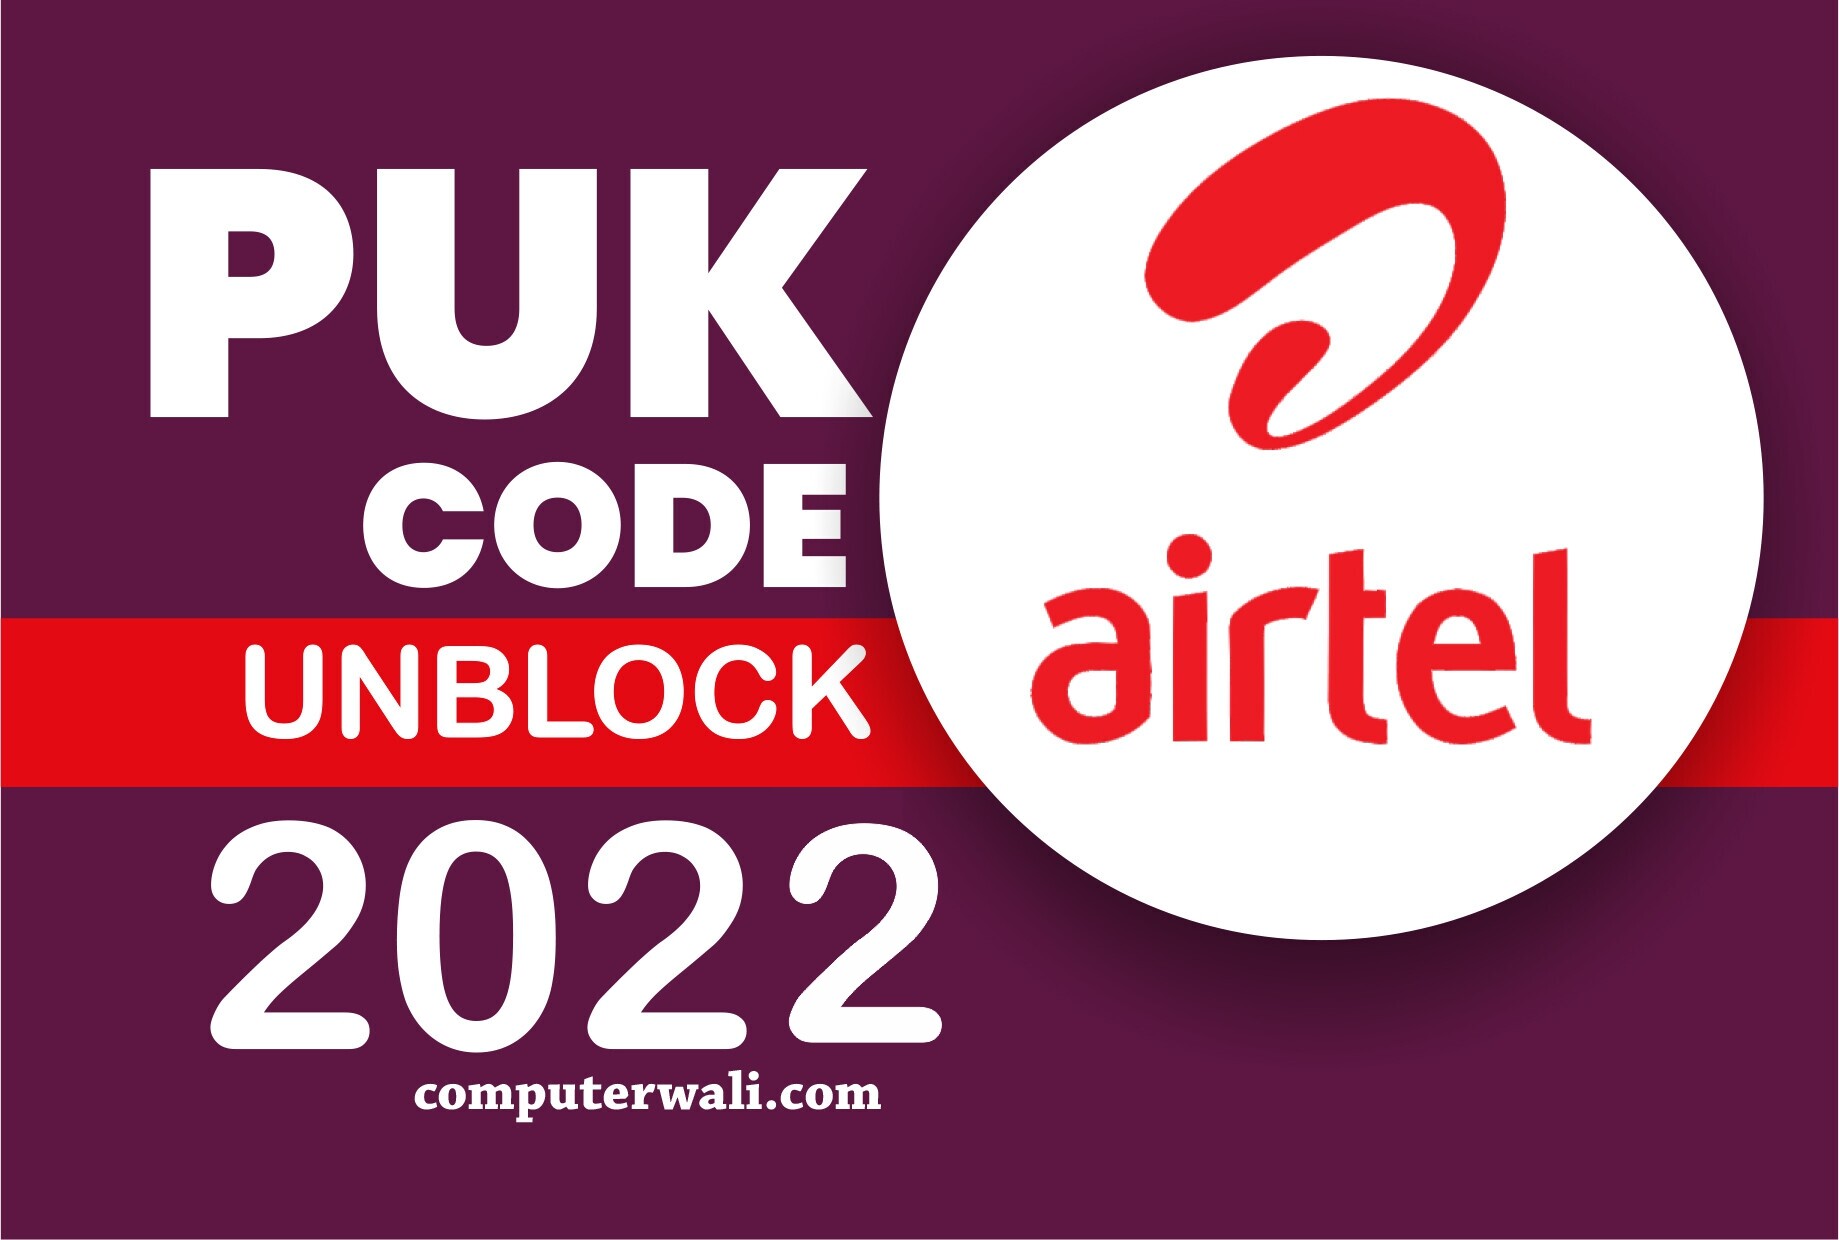 How to Get Airtel PUK Code Through SMS - wide 11